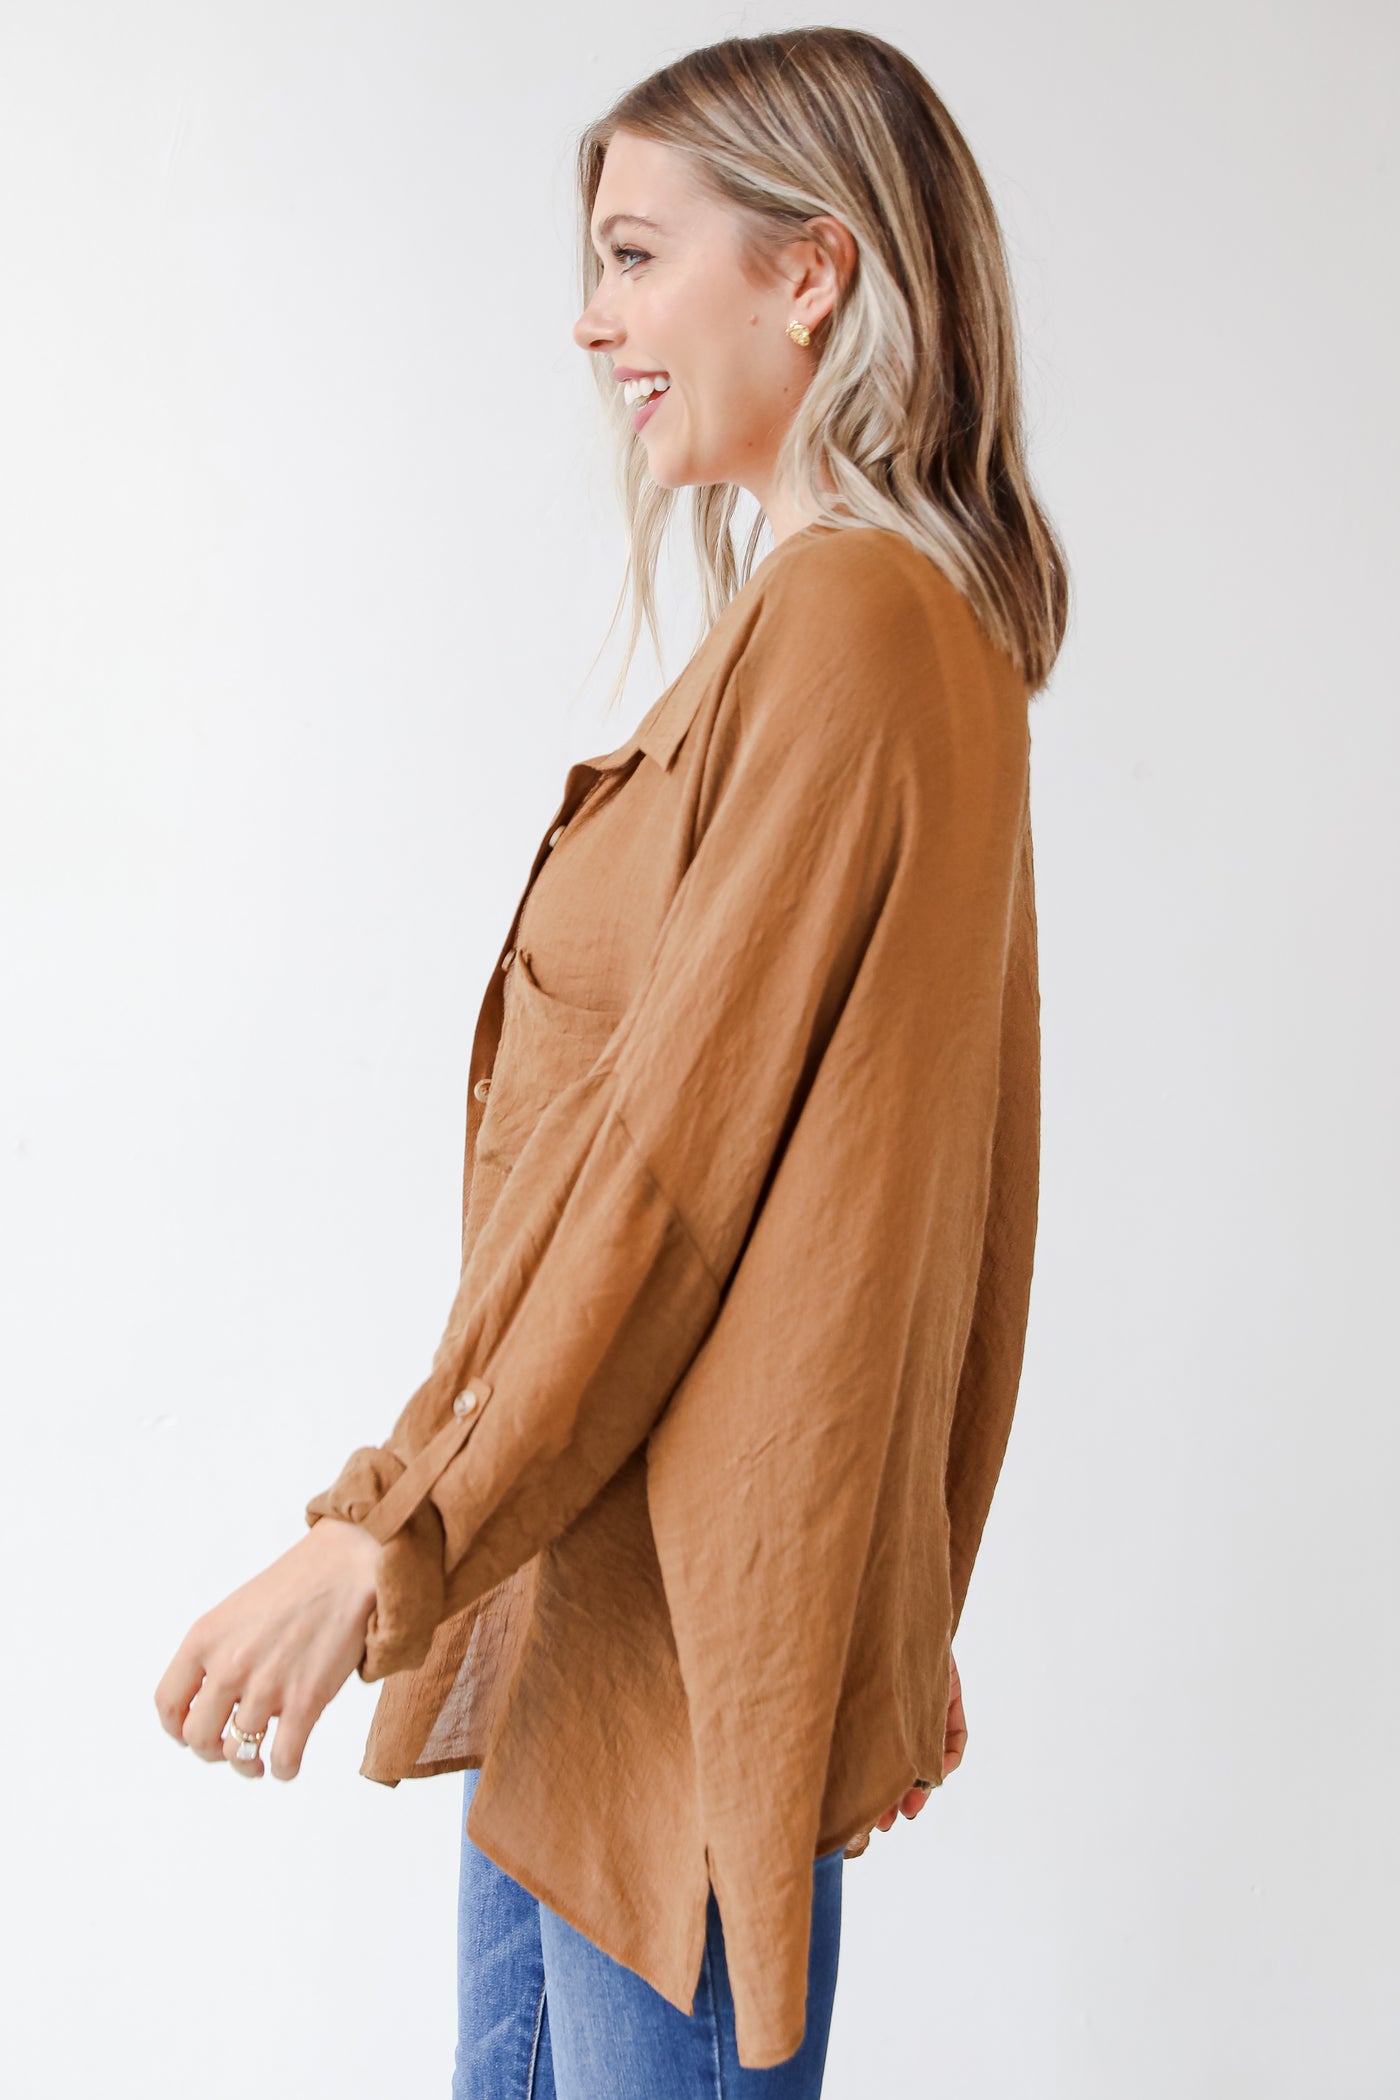 camel blouse side view